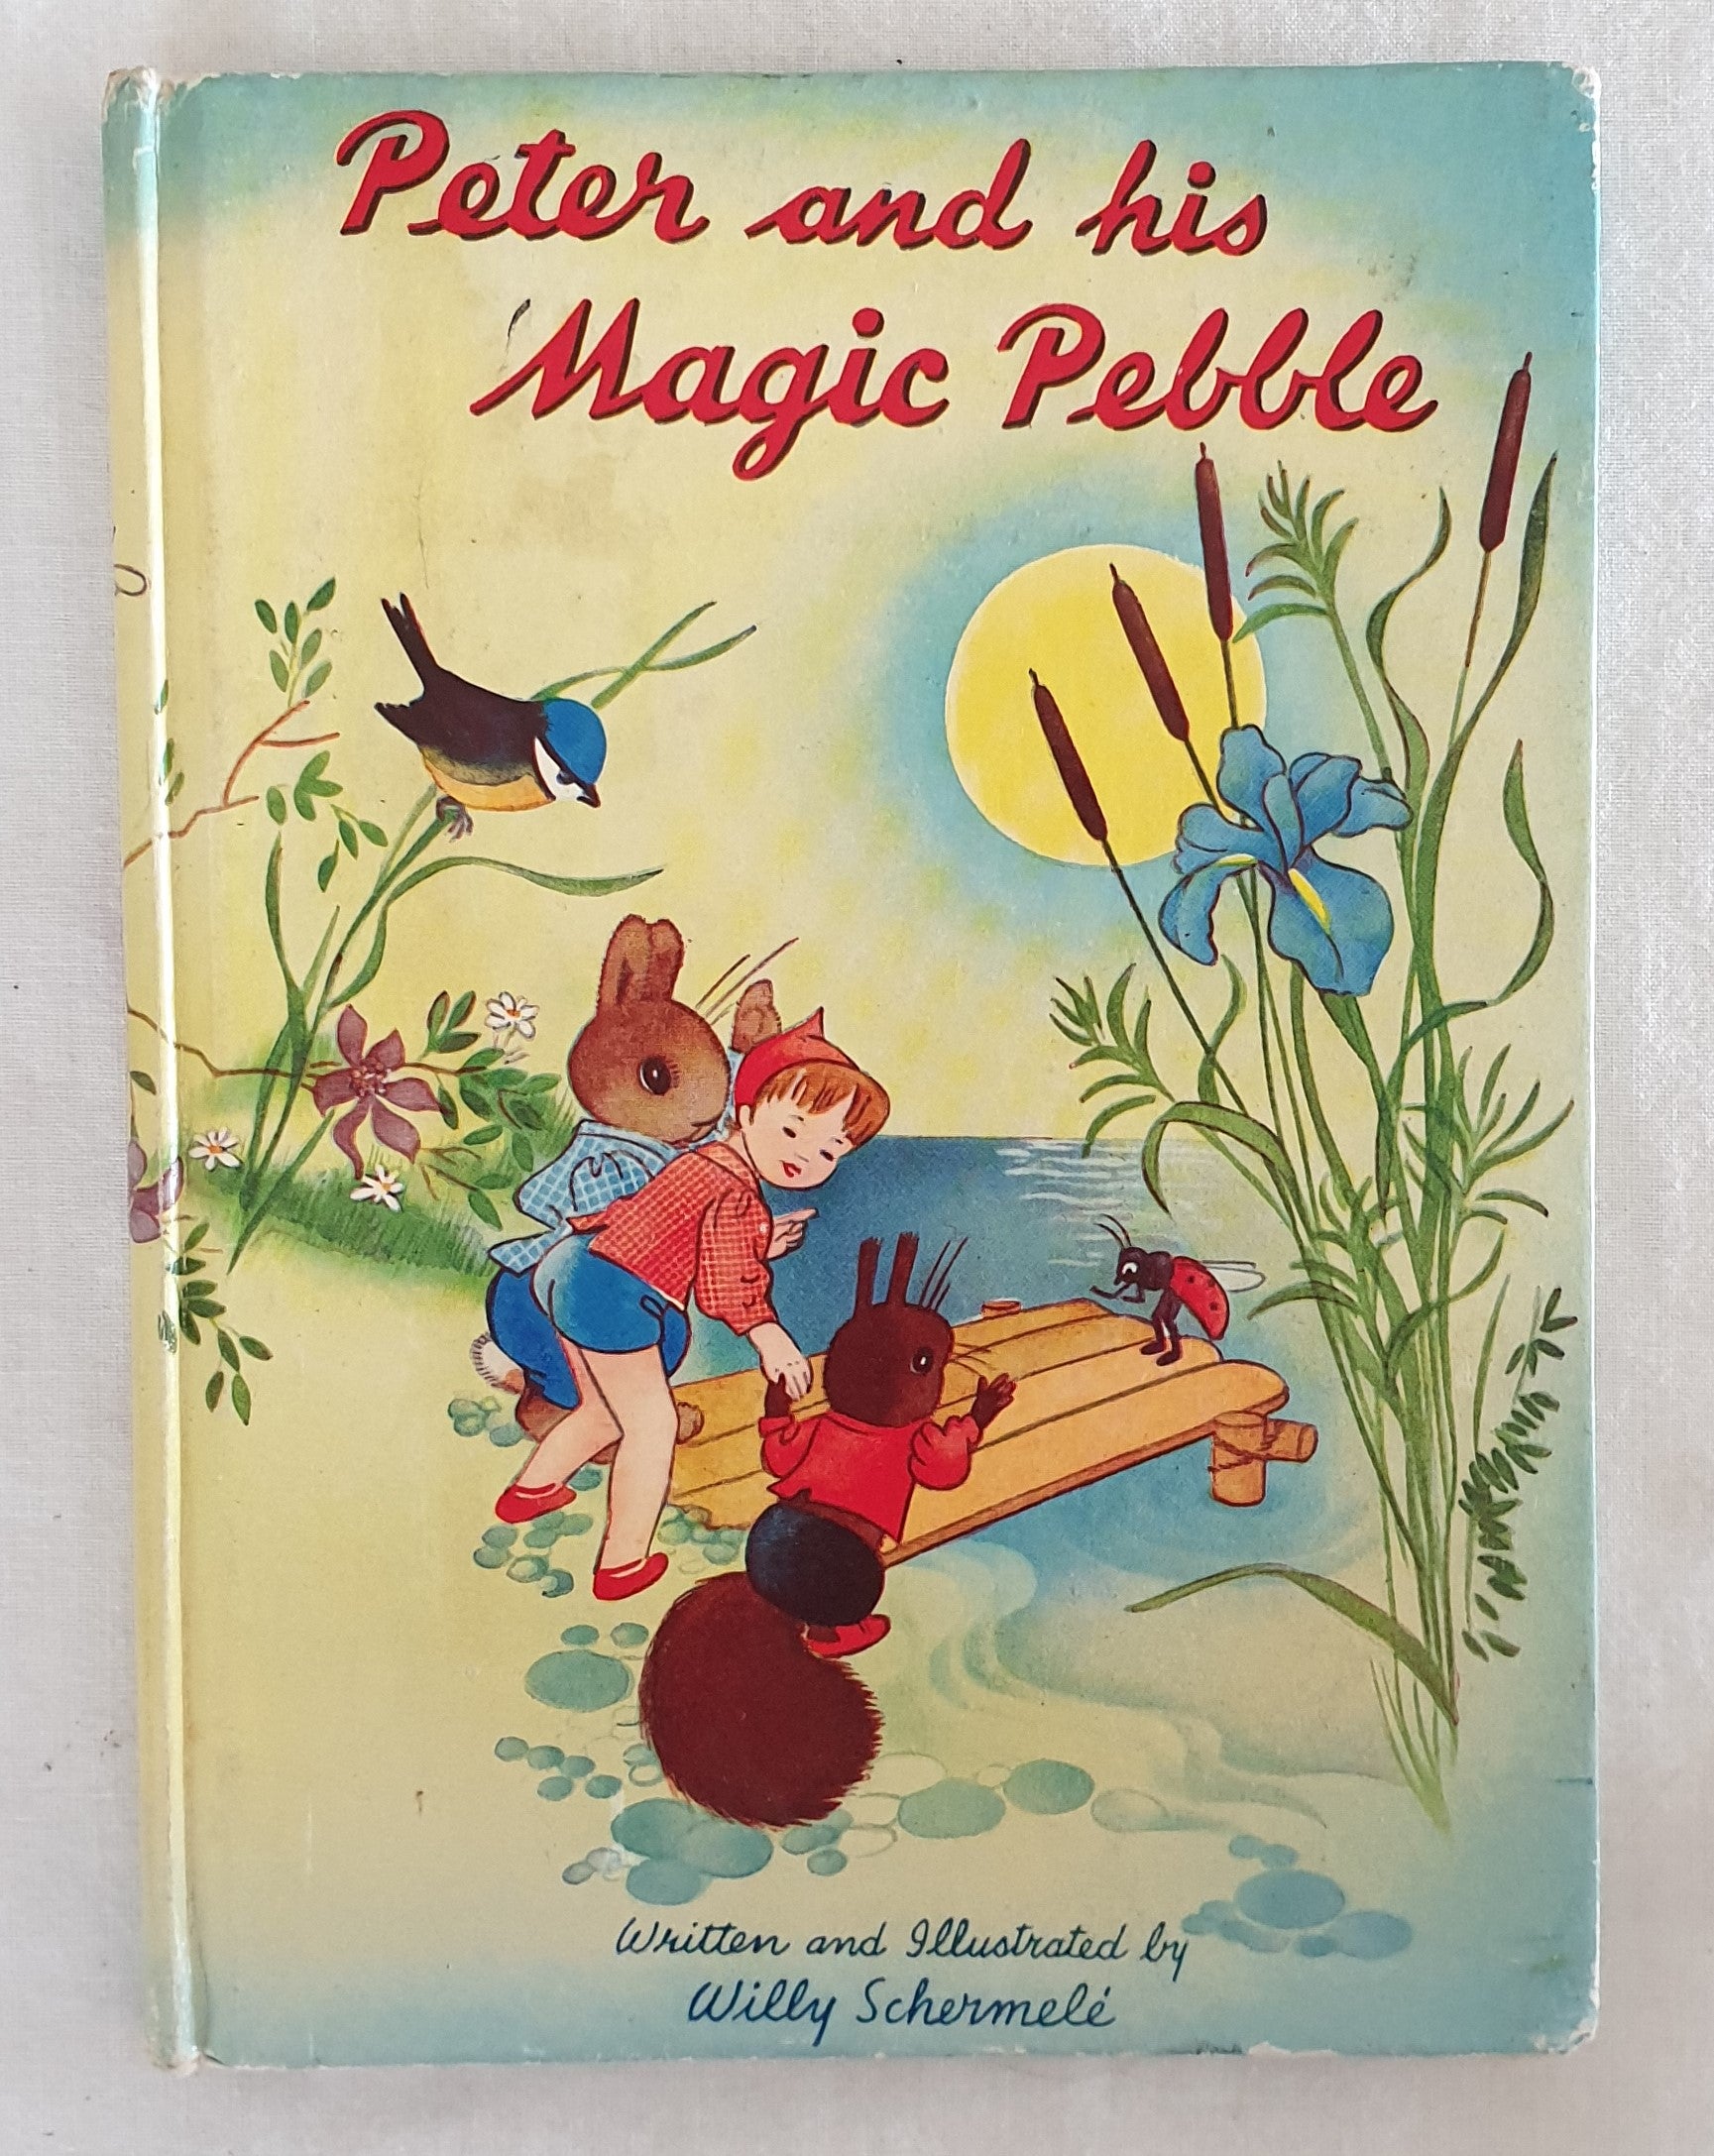 Peter and his Magic Pebble by Willy Schermele